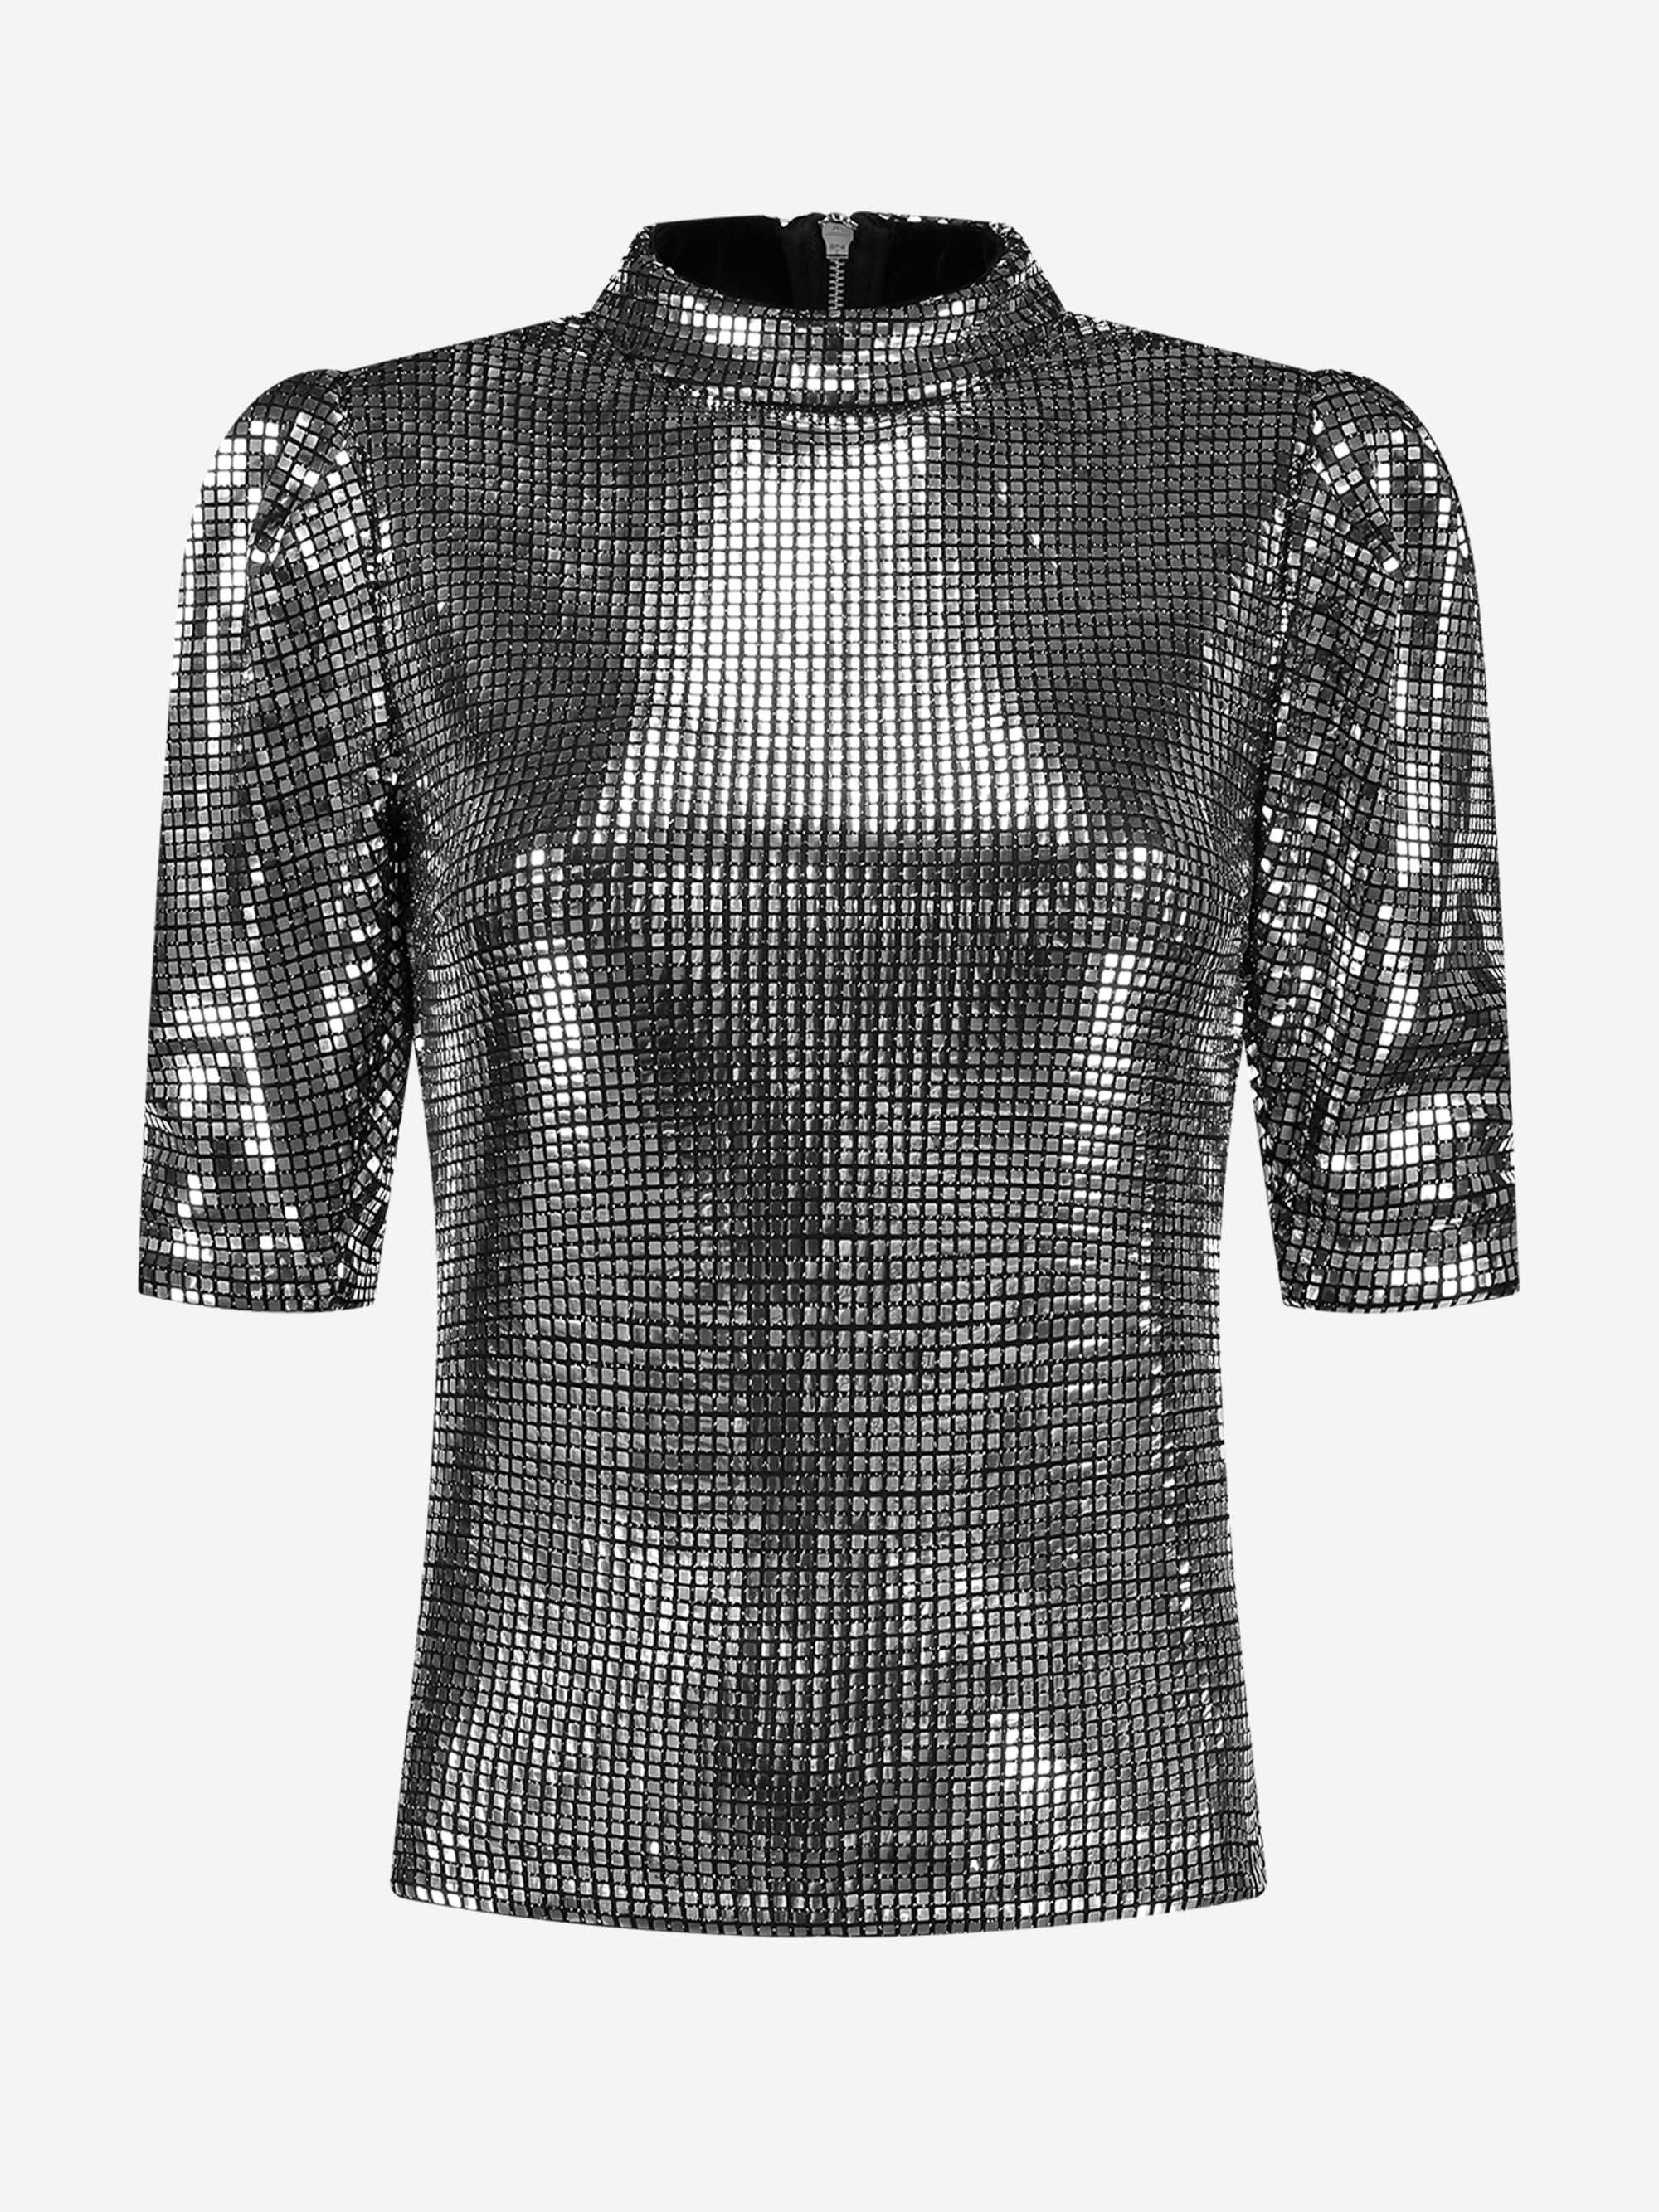 All-over sequins top 